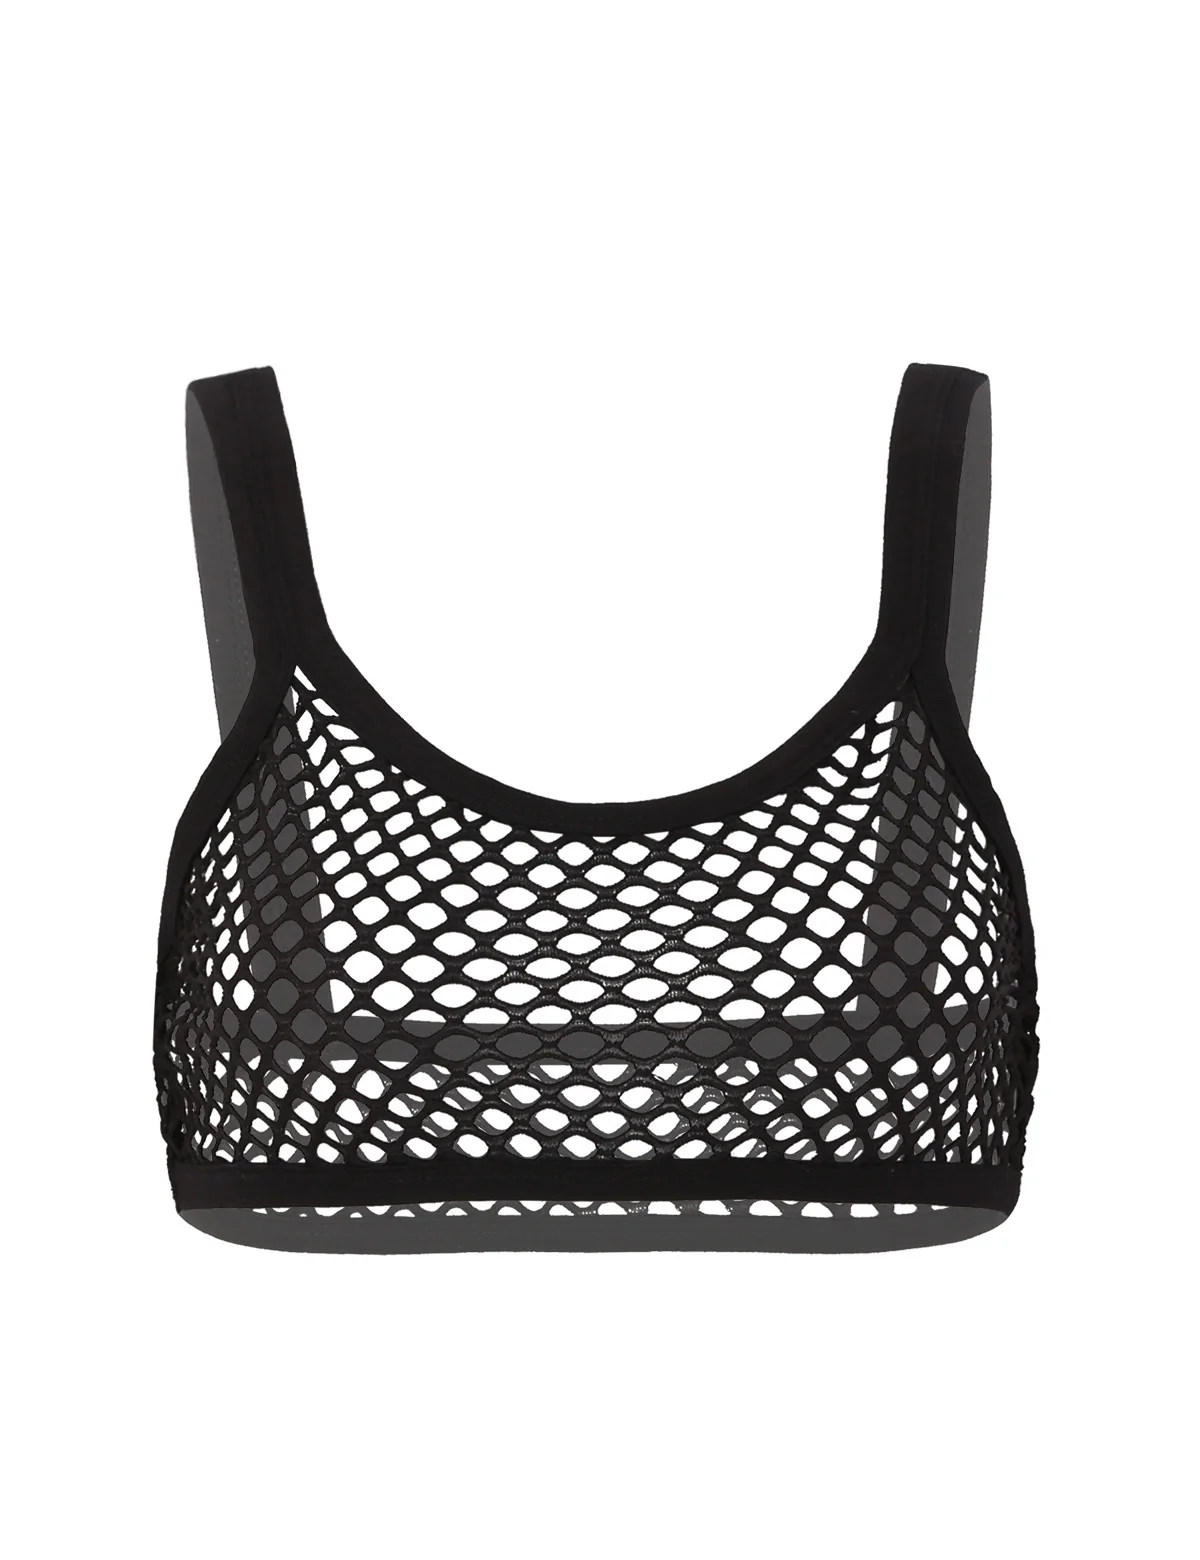 Womens Fishnet Hollow Out Bralette Vest See Through U-Neck Cropped Bra Tank Tops